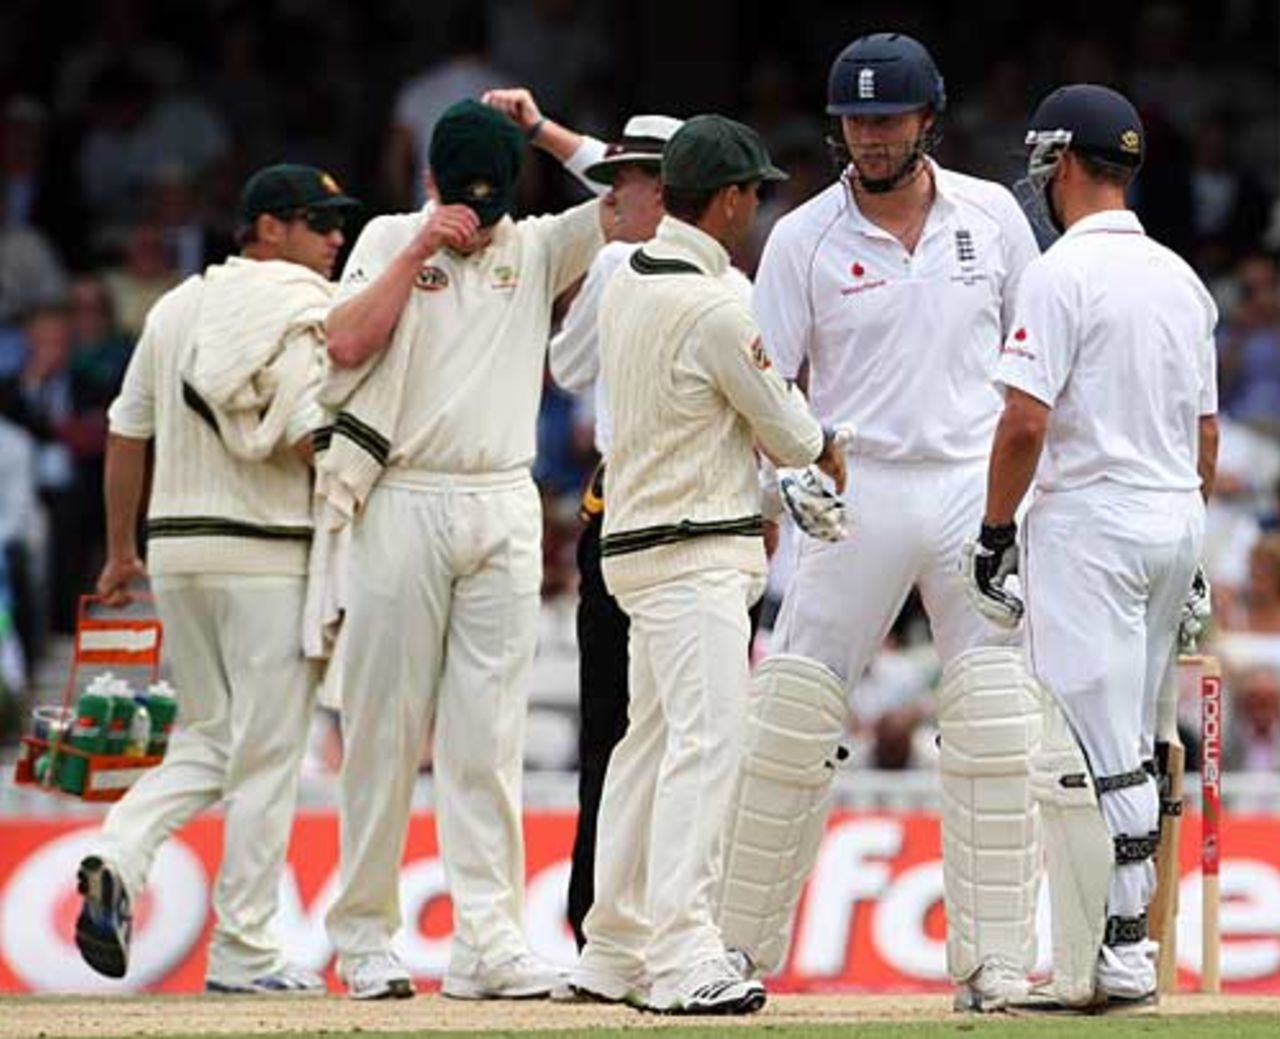 Andrew Flintoff is greeted by a handshake from Ricky Ponting at the start of his last Test innings, England v Australia, 5th Test, The Oval, 3rd day, August 22, 2009